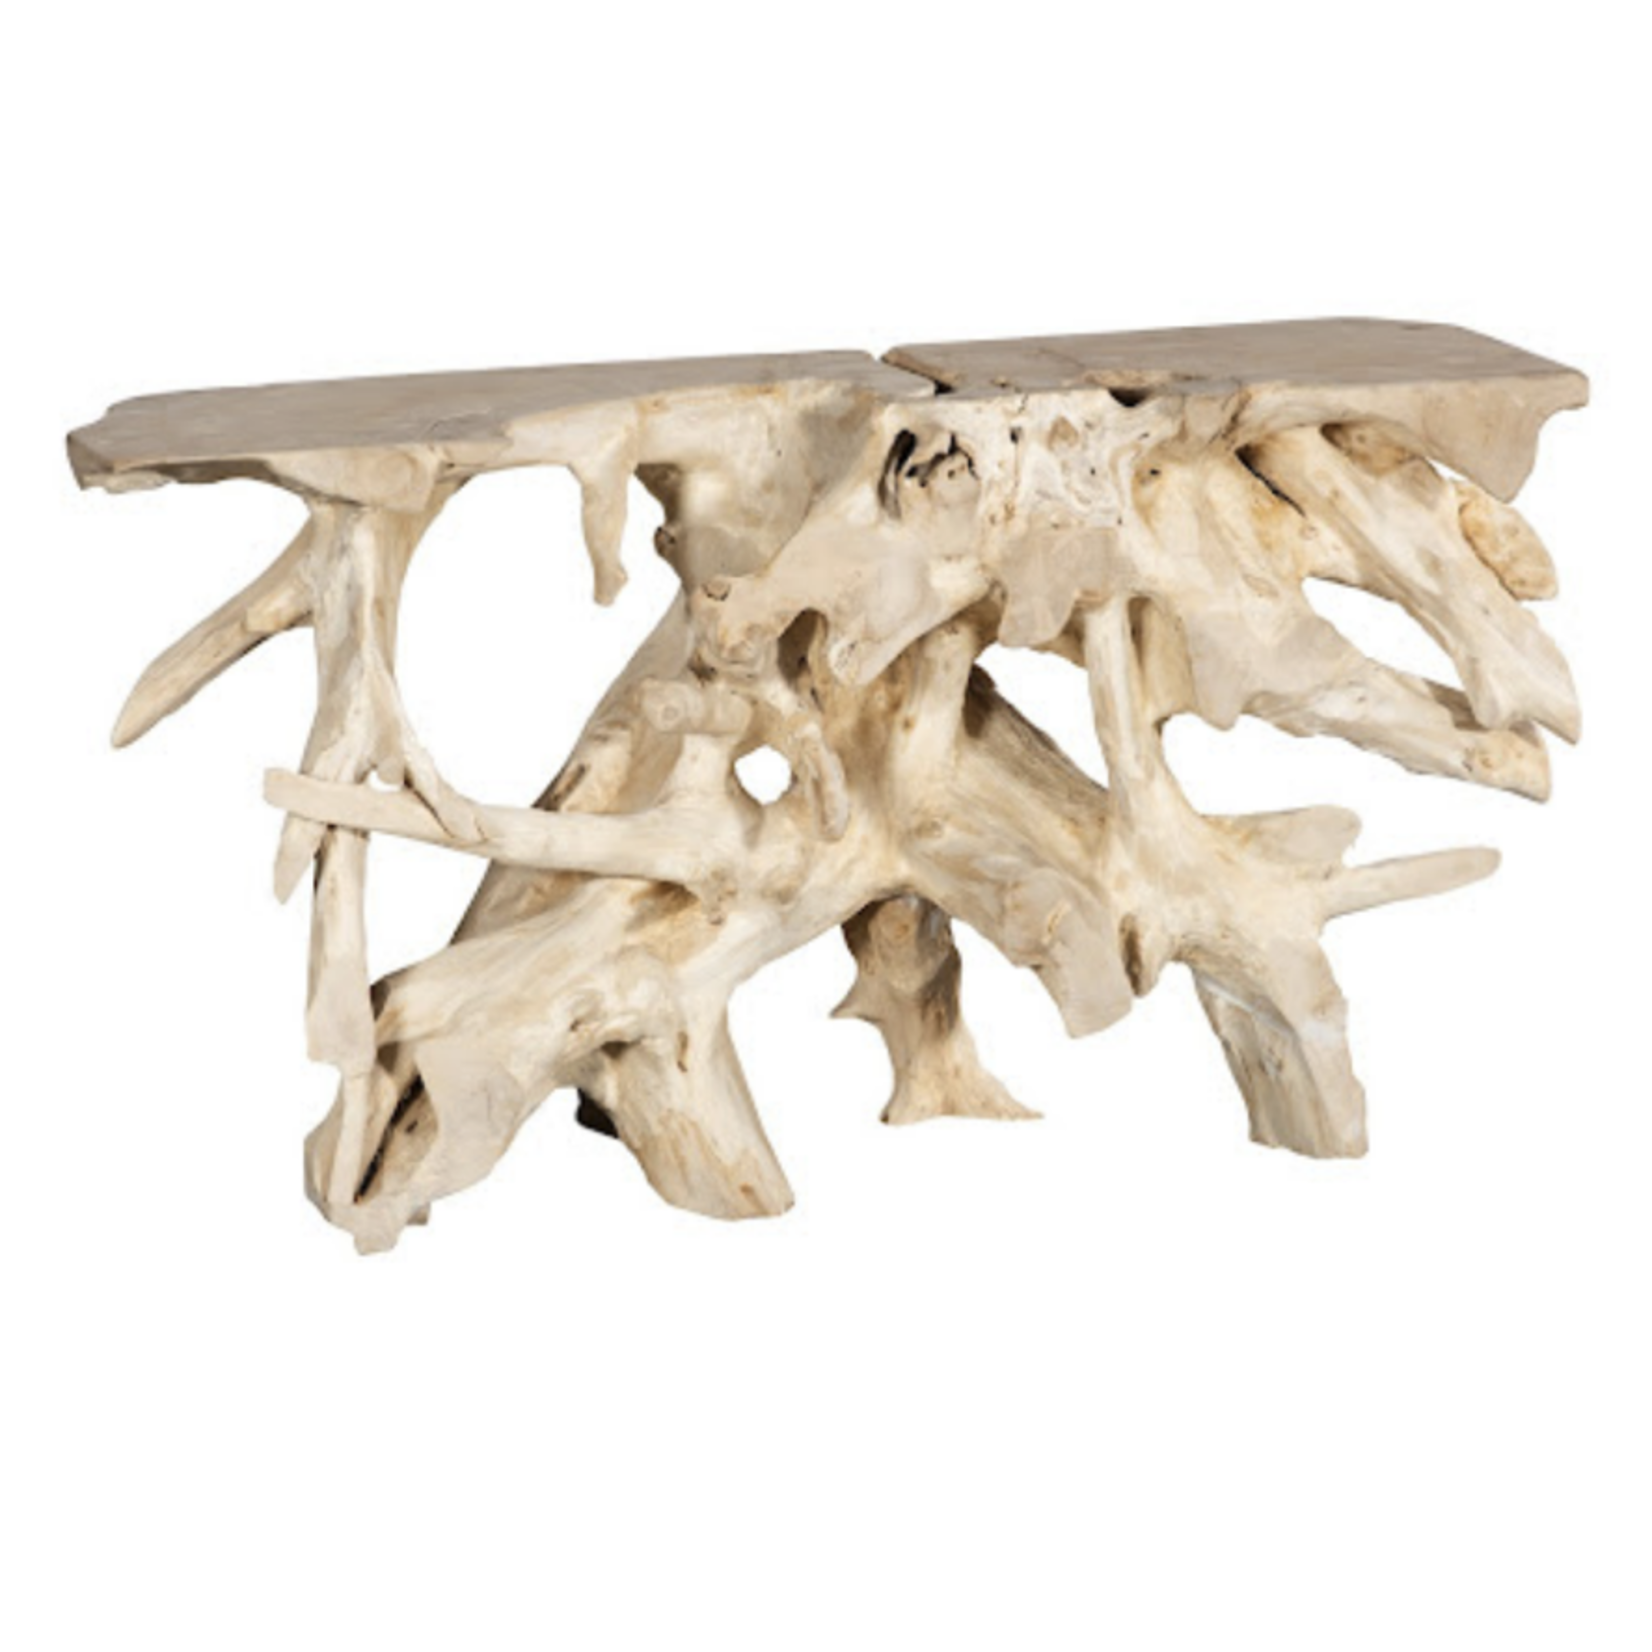 Outside The Box 60x16x32 Bleached Teak Root Console Table #1